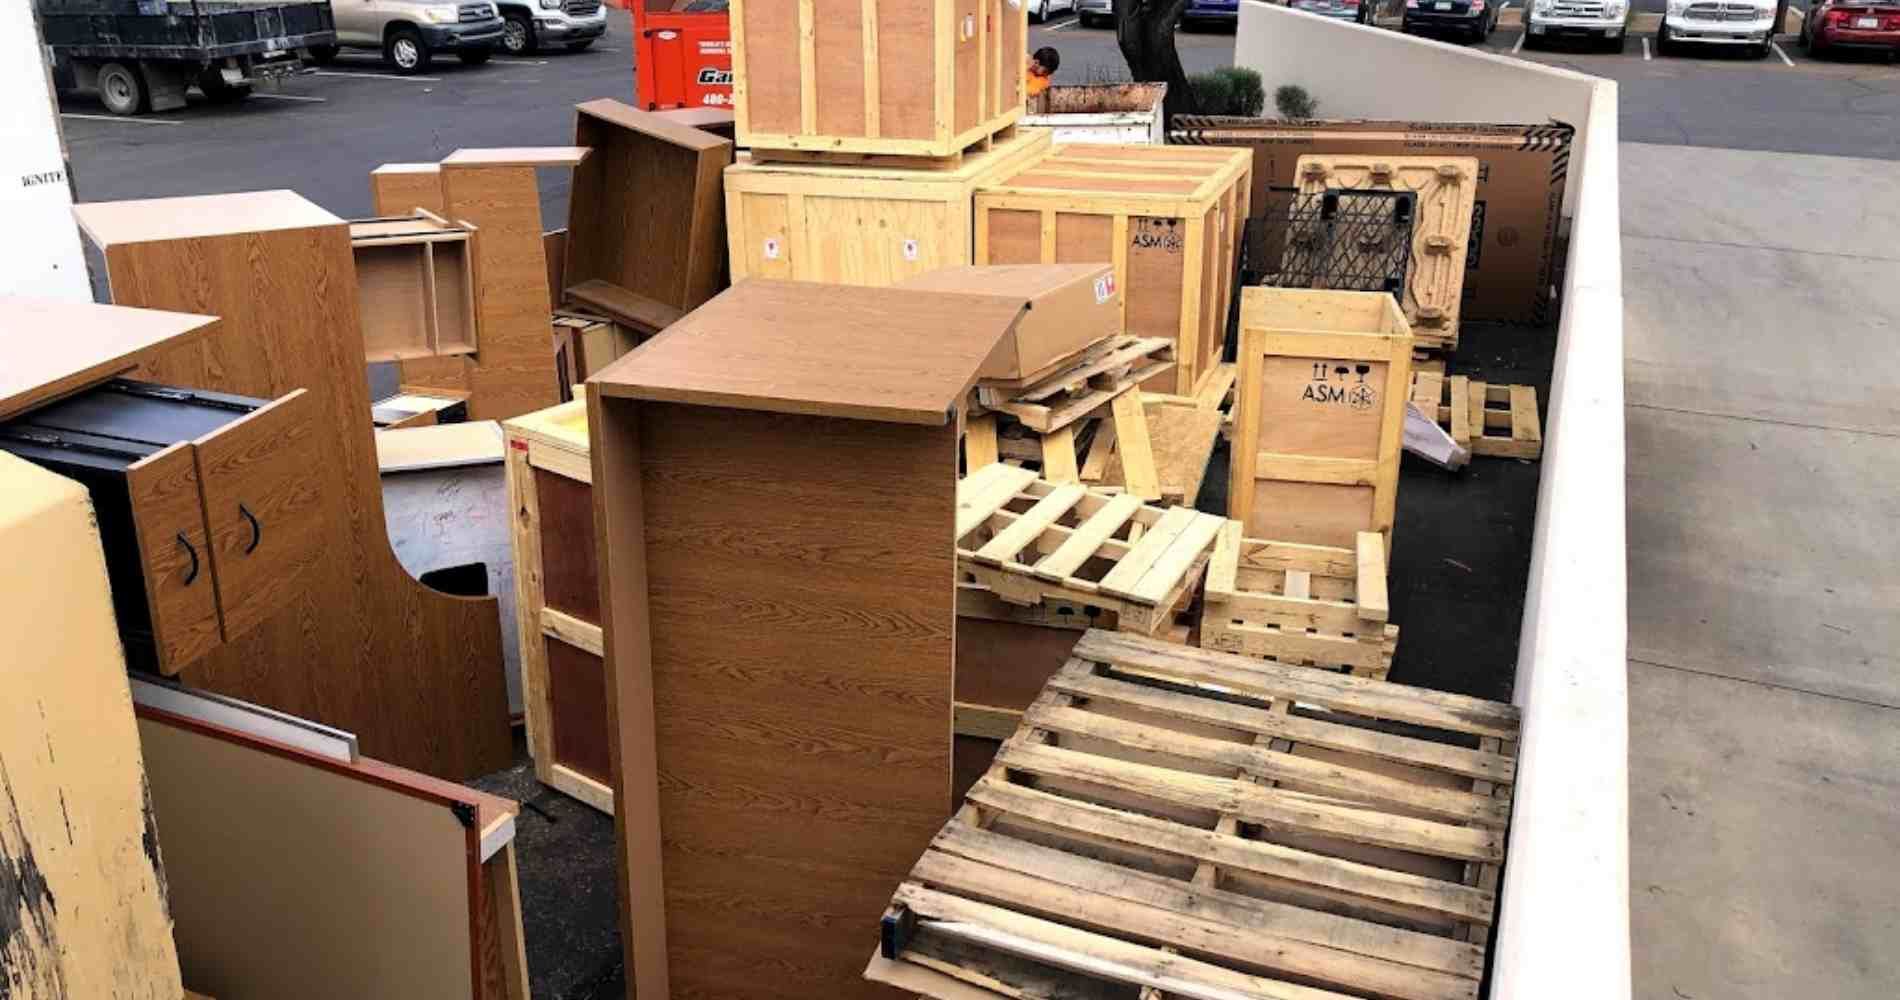 #1 for Pallet Disposal in Sun City, AZ With Over 1200 5-Star Reviews!